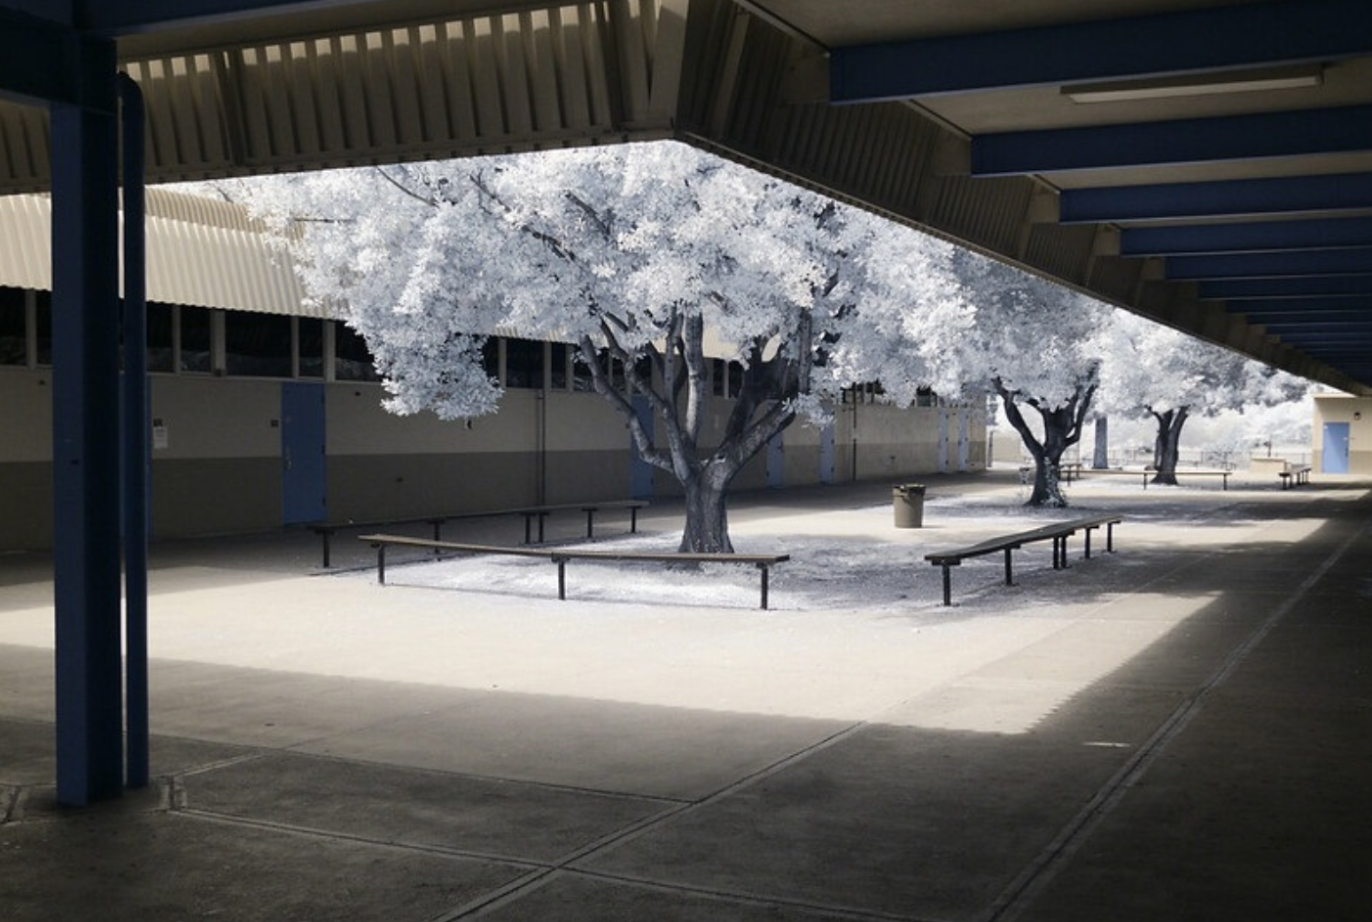 White trees and outdoor school courtyard image